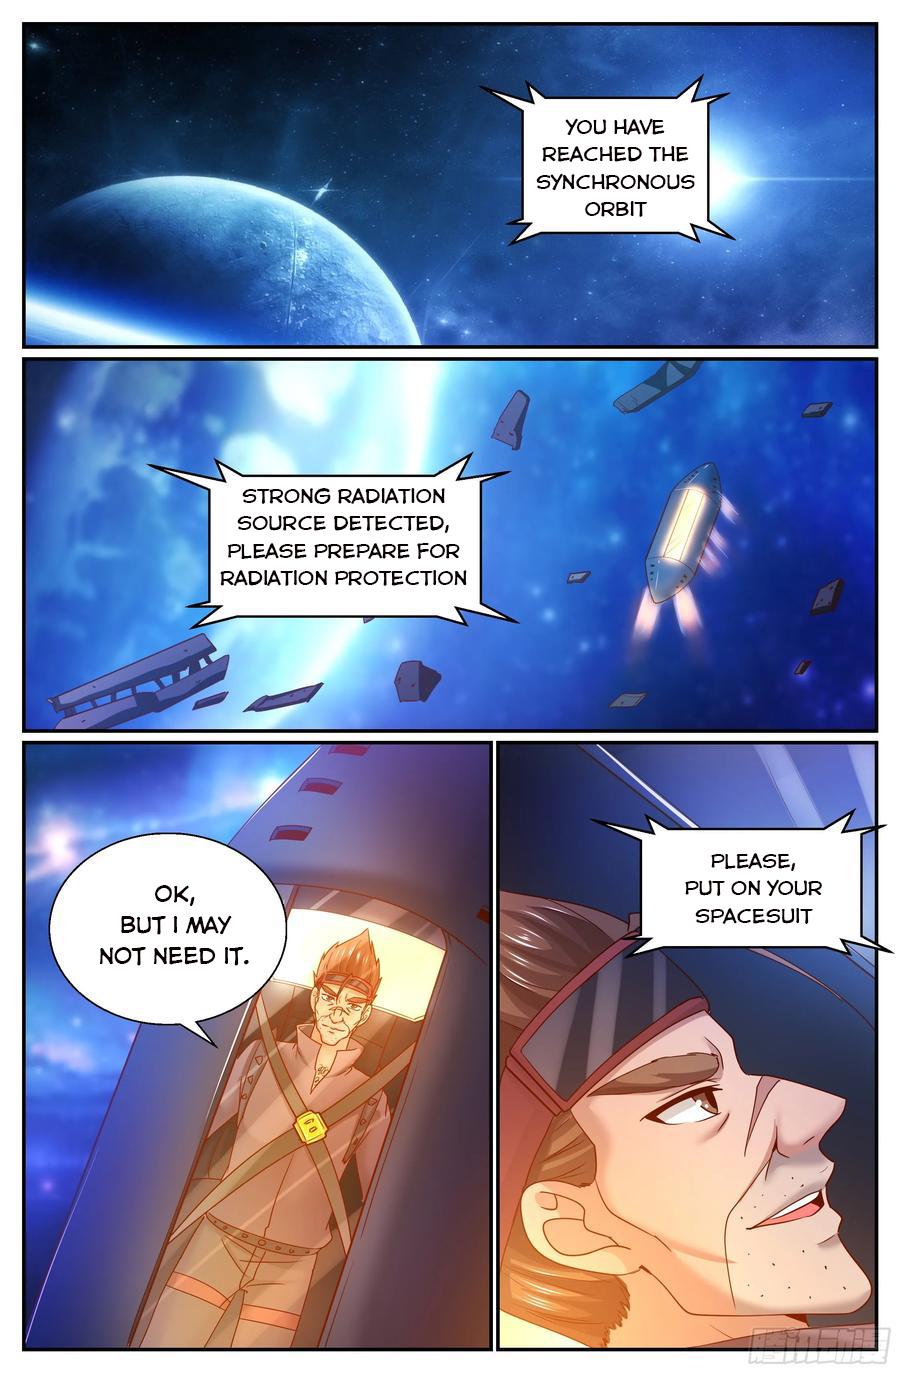 I Have A Mansion In The Post-Apocalyptic World - Page 2